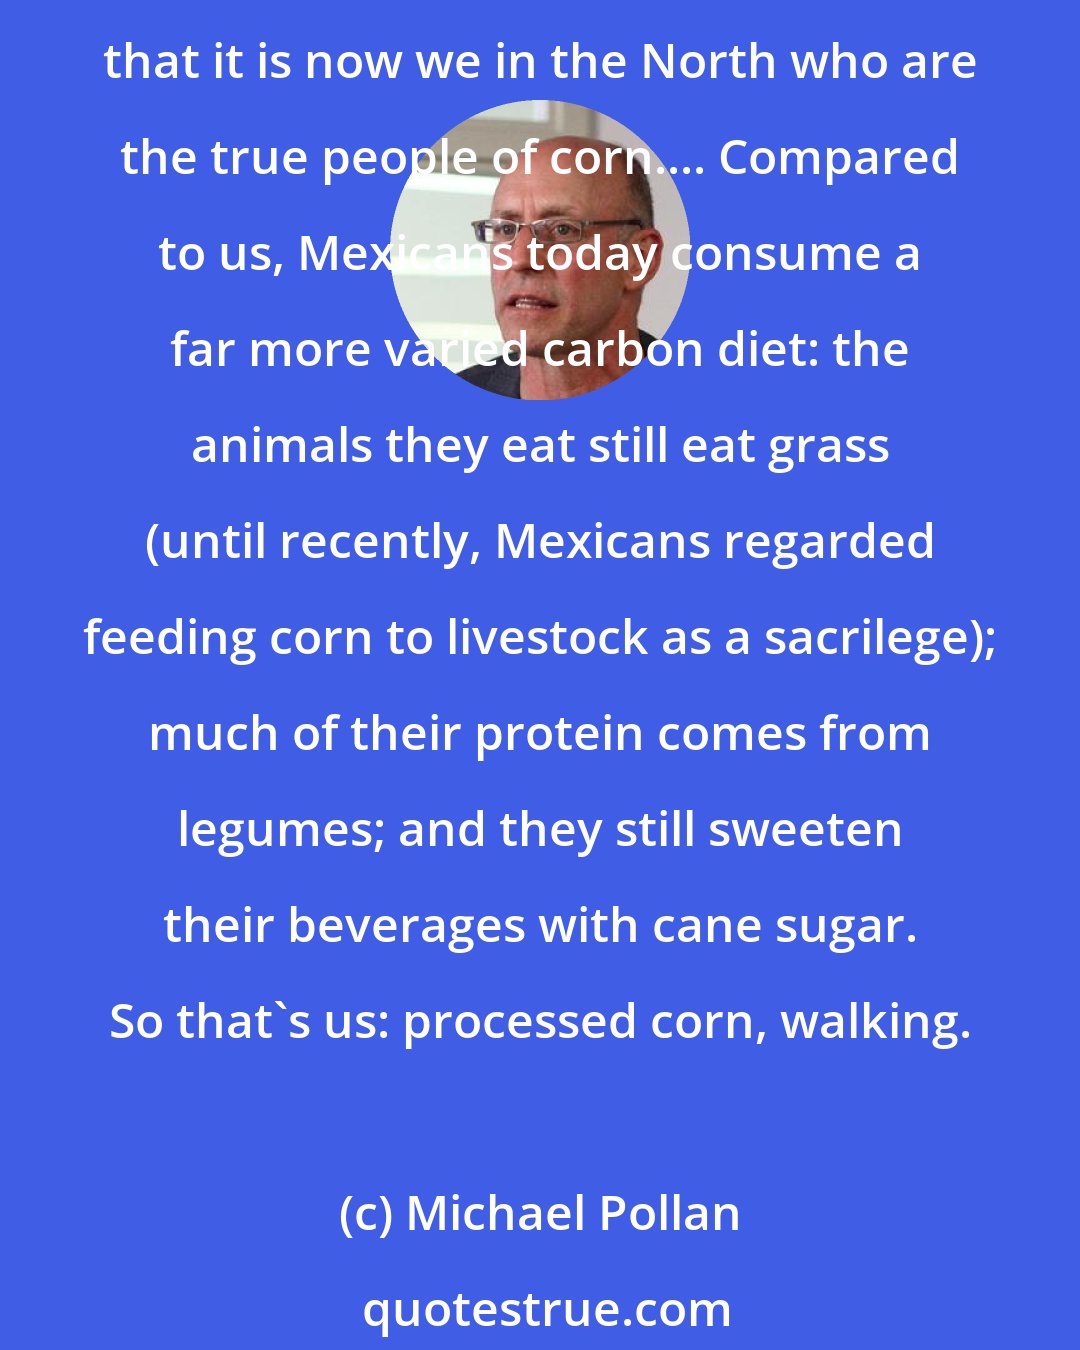 Michael Pollan: But carbon 13 [the carbon from corn] doesn't lie, and researchers who have compared the isotopes in the flesh or hair of Americans to those in the same tissues of Mexicans report that it is now we in the North who are the true people of corn.... Compared to us, Mexicans today consume a far more varied carbon diet: the animals they eat still eat grass (until recently, Mexicans regarded feeding corn to livestock as a sacrilege); much of their protein comes from legumes; and they still sweeten their beverages with cane sugar. So that's us: processed corn, walking.